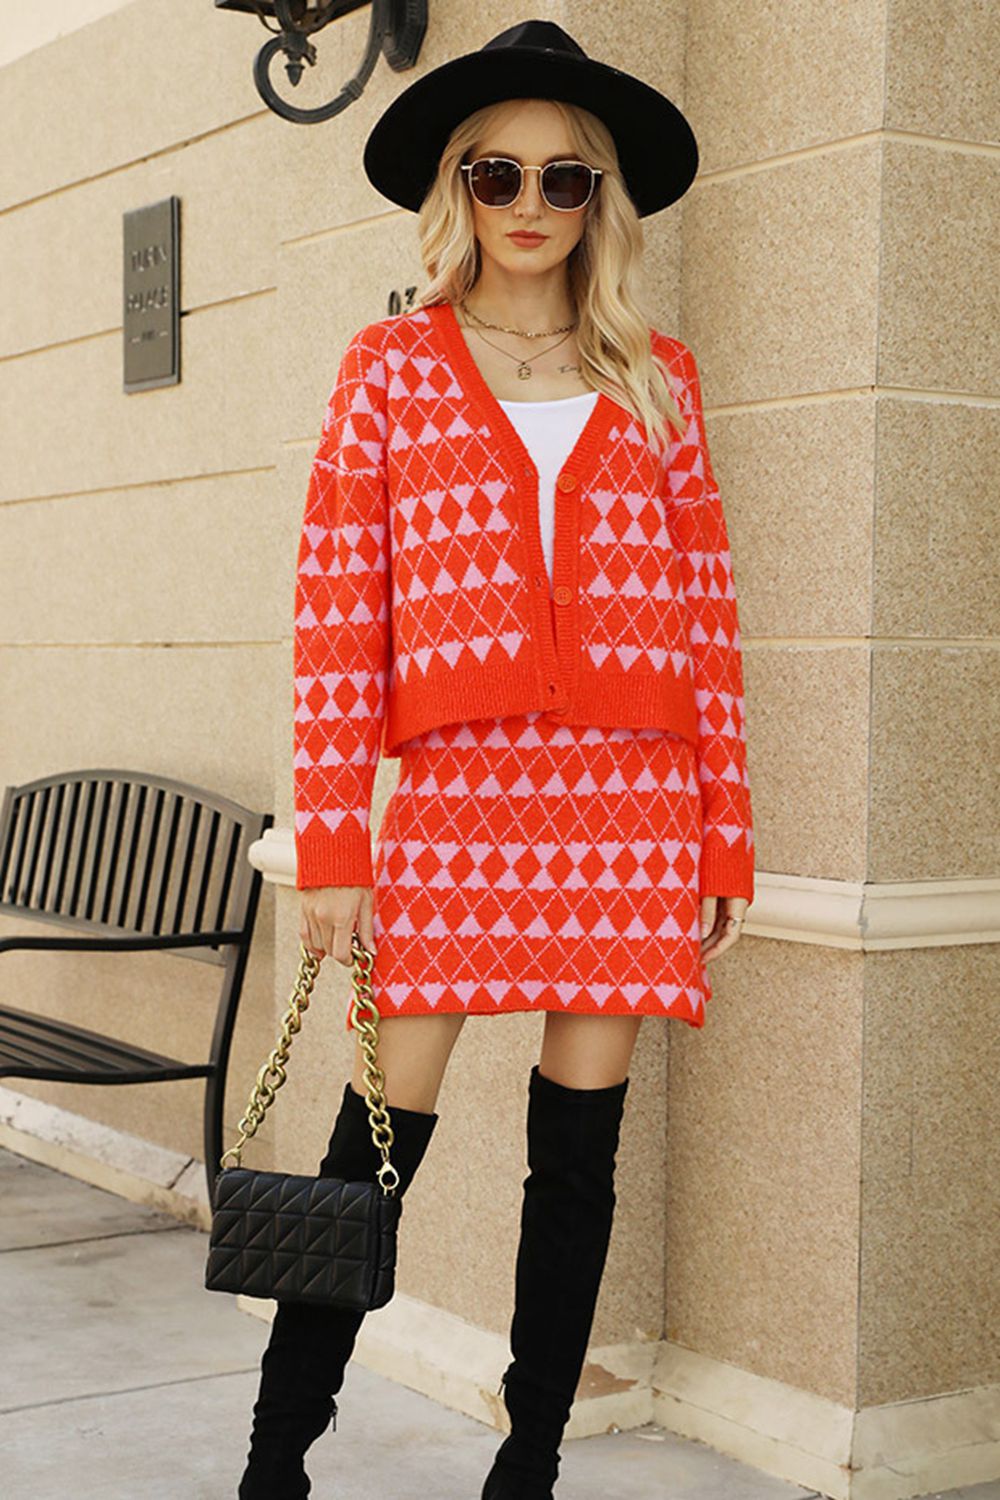 Geometric Dropped Shoulder Cardigan and Knit Skirt Set - Guy Christopher